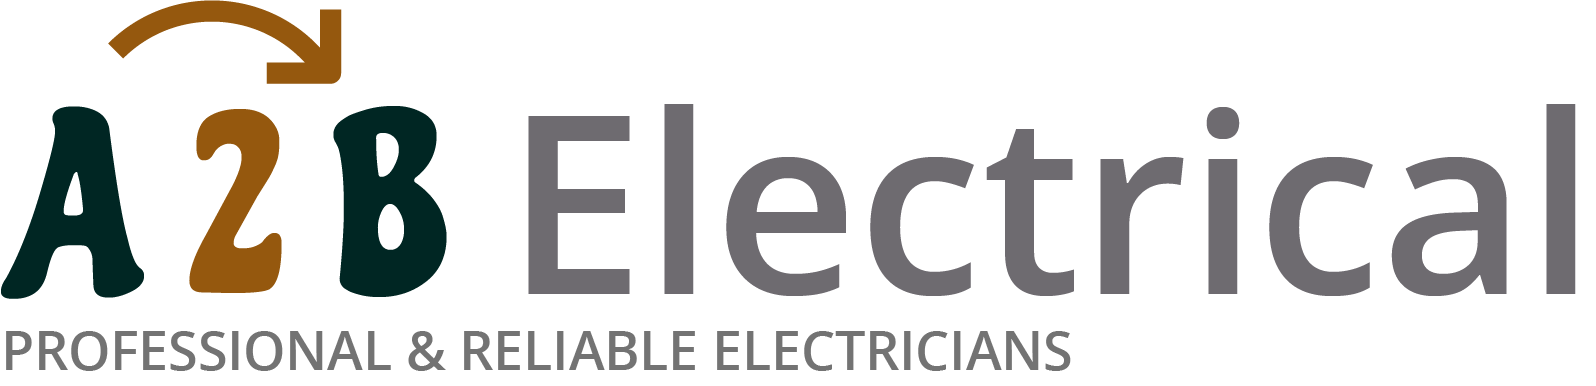 If you have electrical wiring problems in Hoxton, we can provide an electrician to have a look for you. 